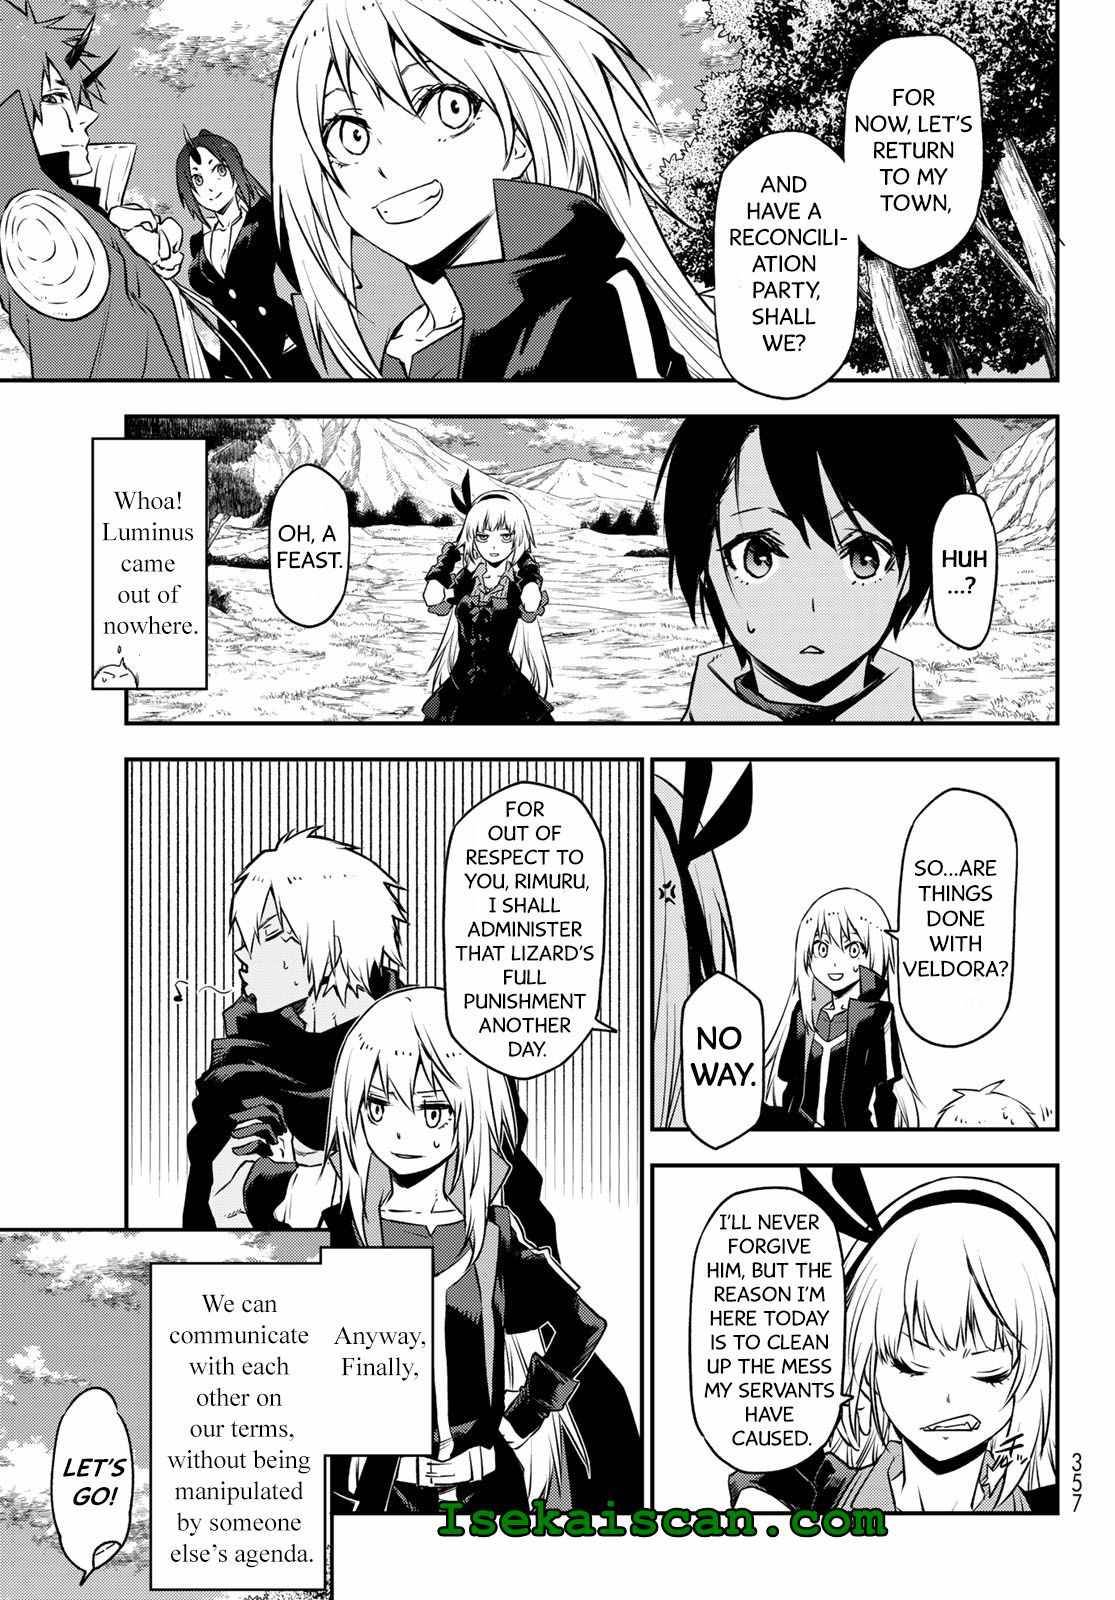 That Time I Got Reincarnated as a Slime, Chapter 98